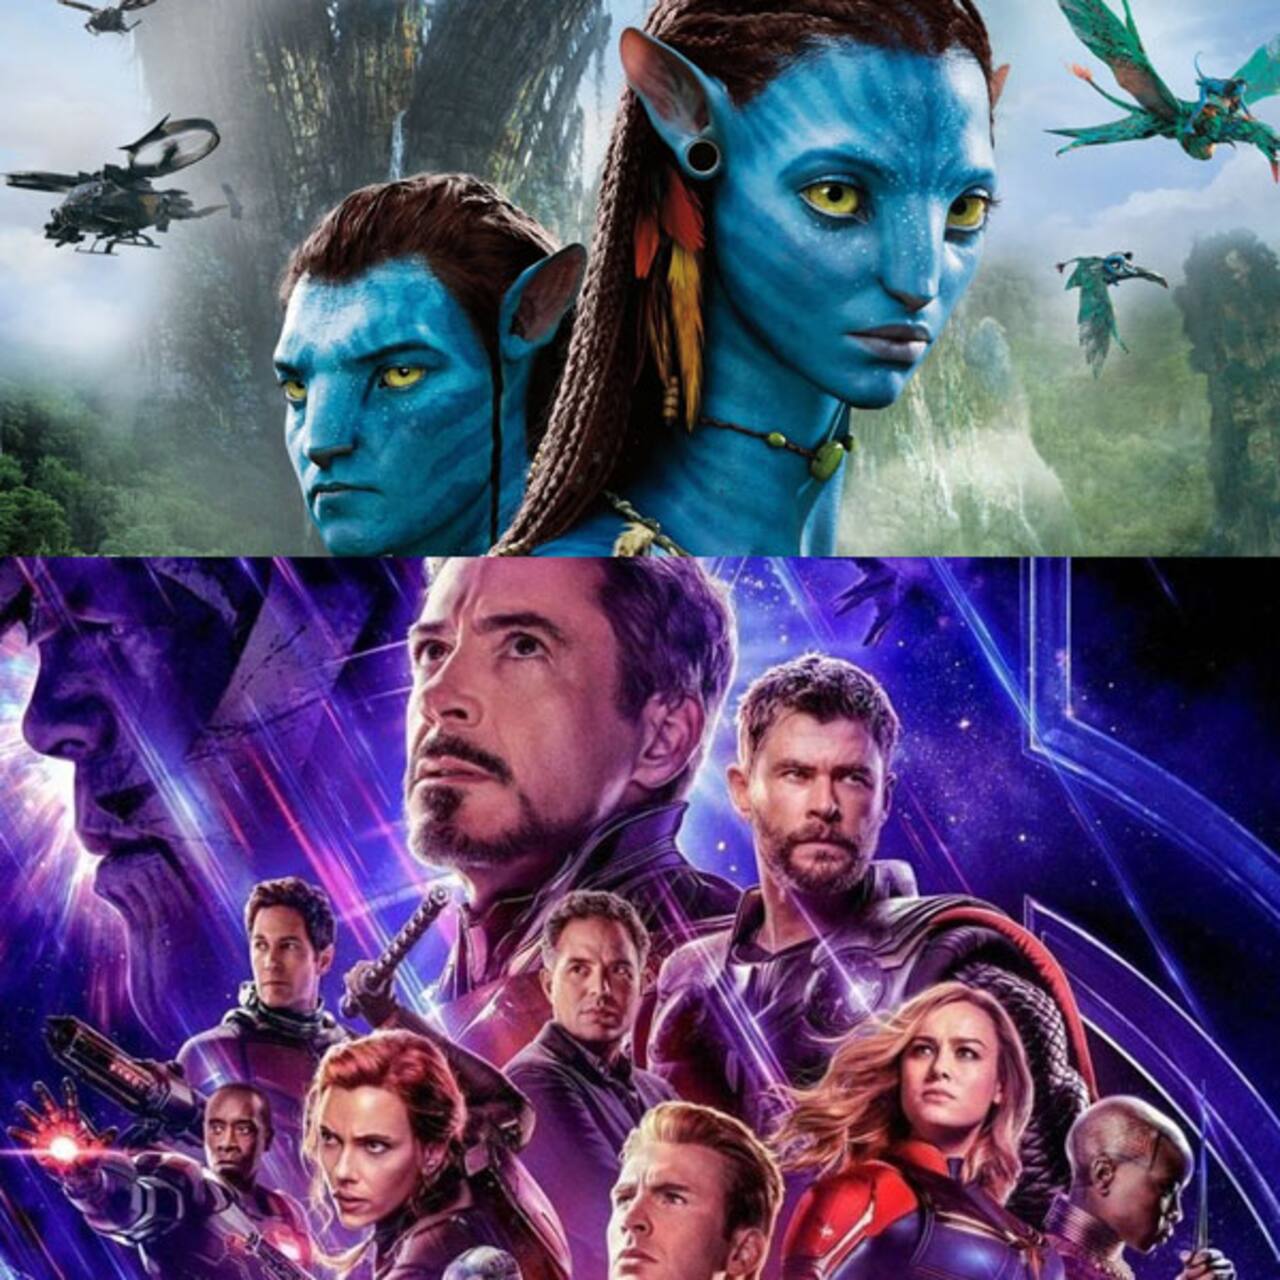 Avatar 2 The Way Of Water India Box Office: James Cameron film sees further  drop on Tuesday; highly unlikely to beat Avengers Endgame opening week  collection